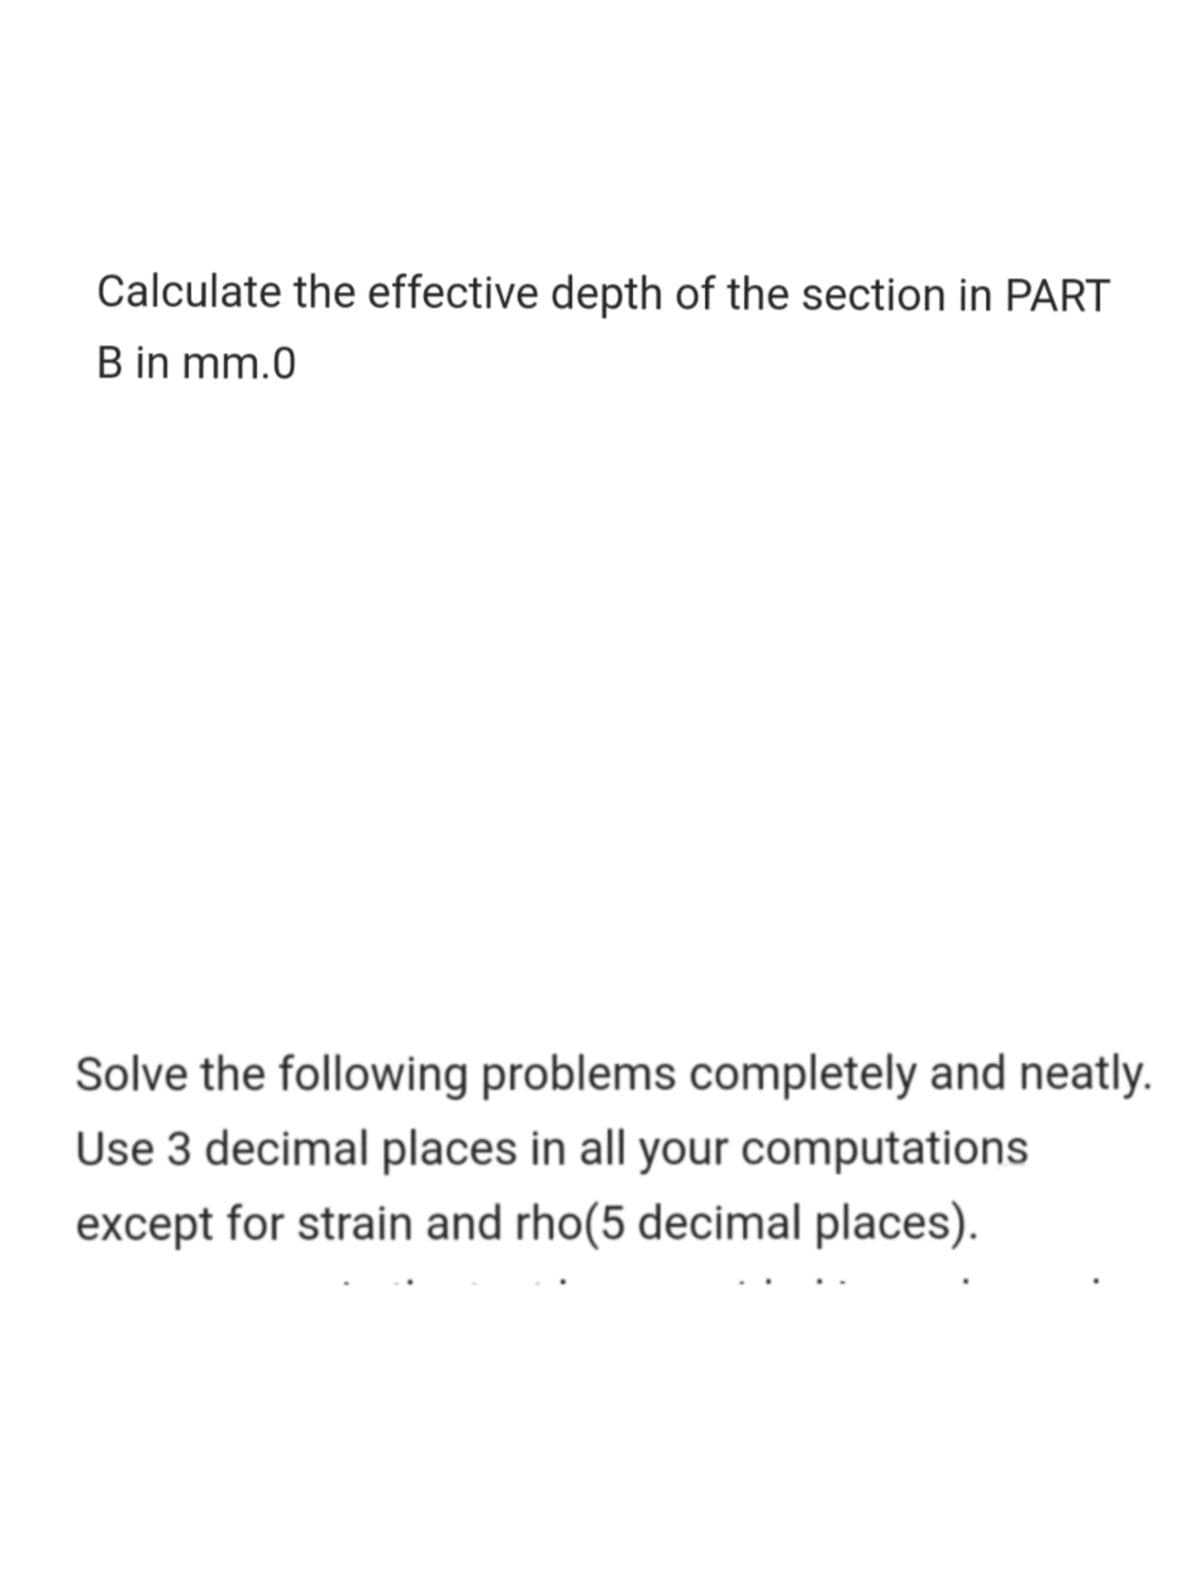 Calculate the effective depth of the section in PART
B in mm.0
Solve the following problems completely and neatly.
Use 3 decimal places in all your computations
except for strain and rho(5 decimal places).